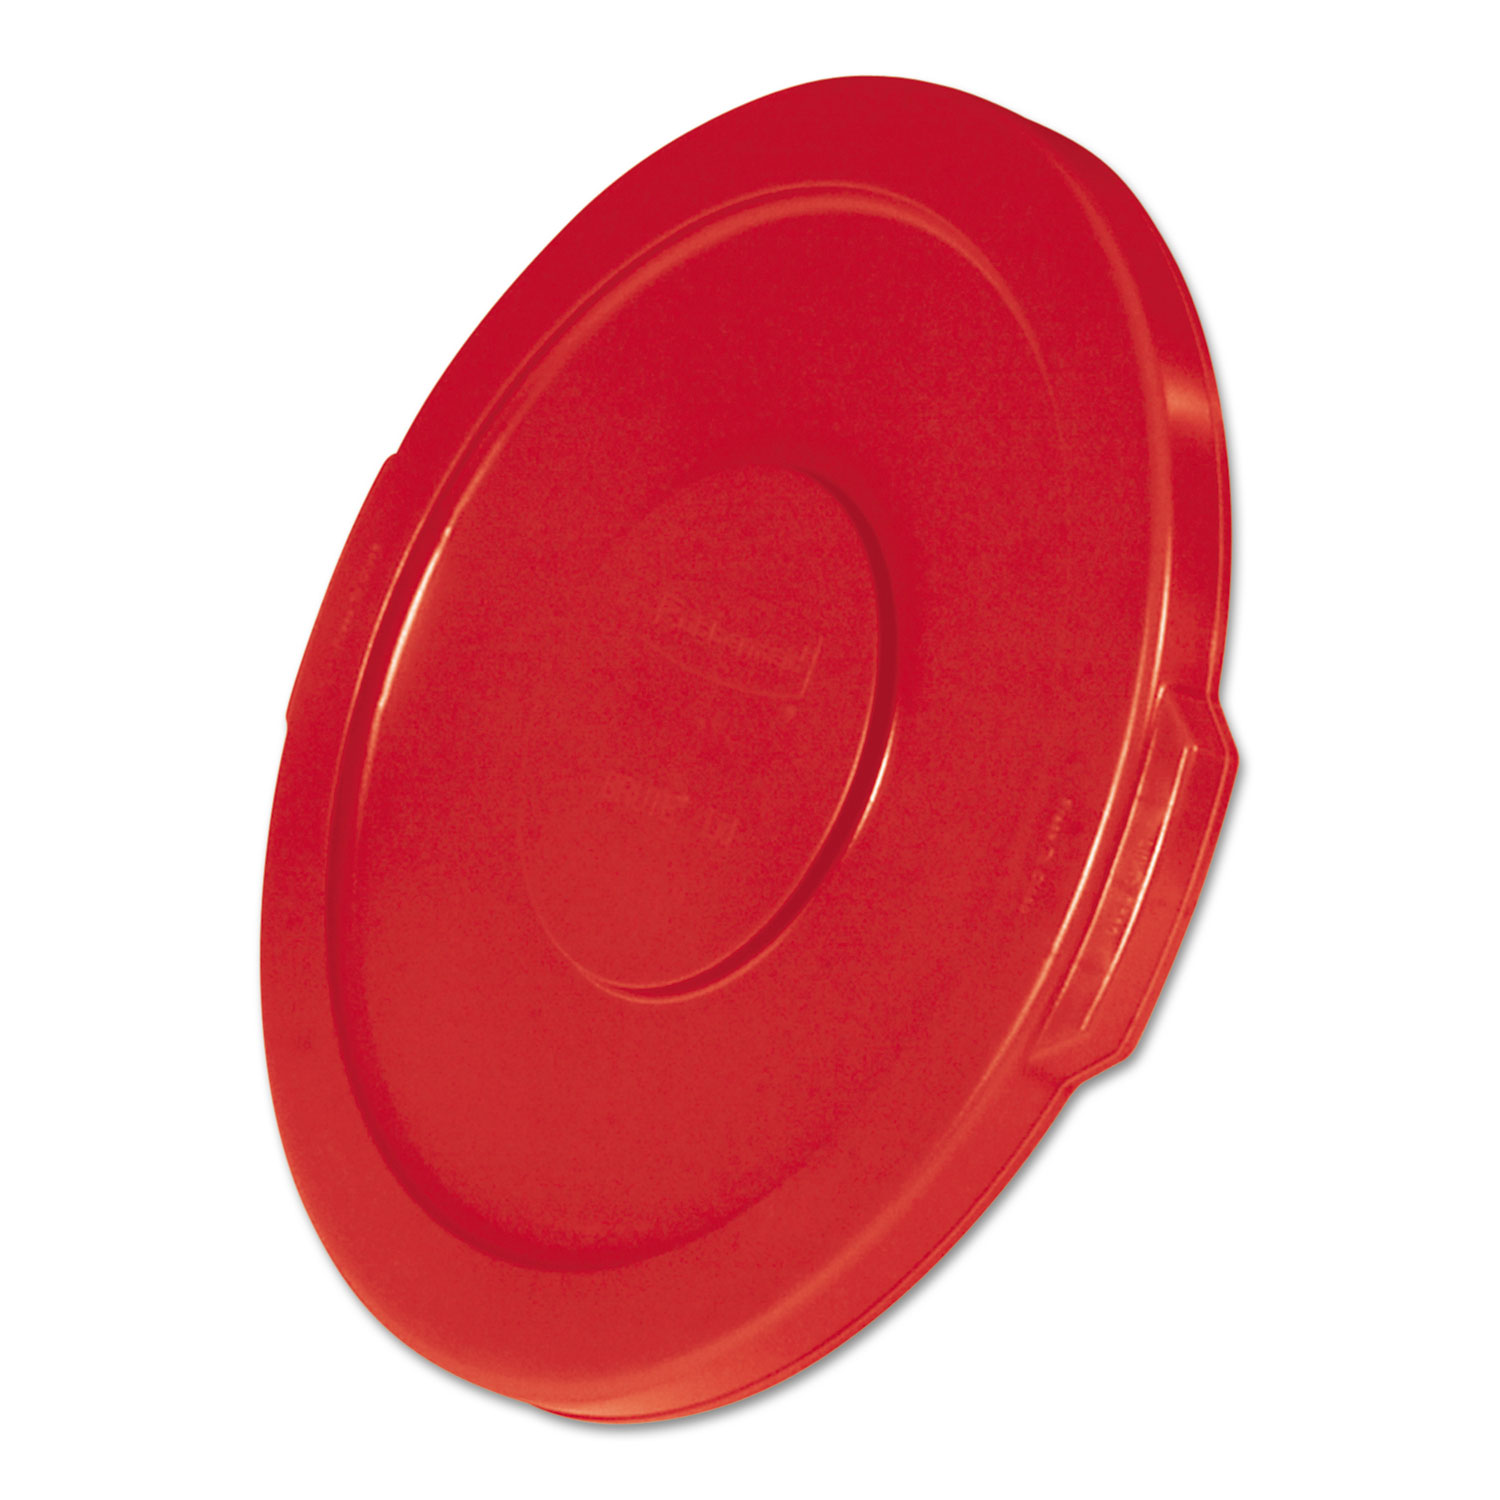 Flat Top Lid for 10-Gallon Round Brute Containers, 16 dia., Red, 6/Carton